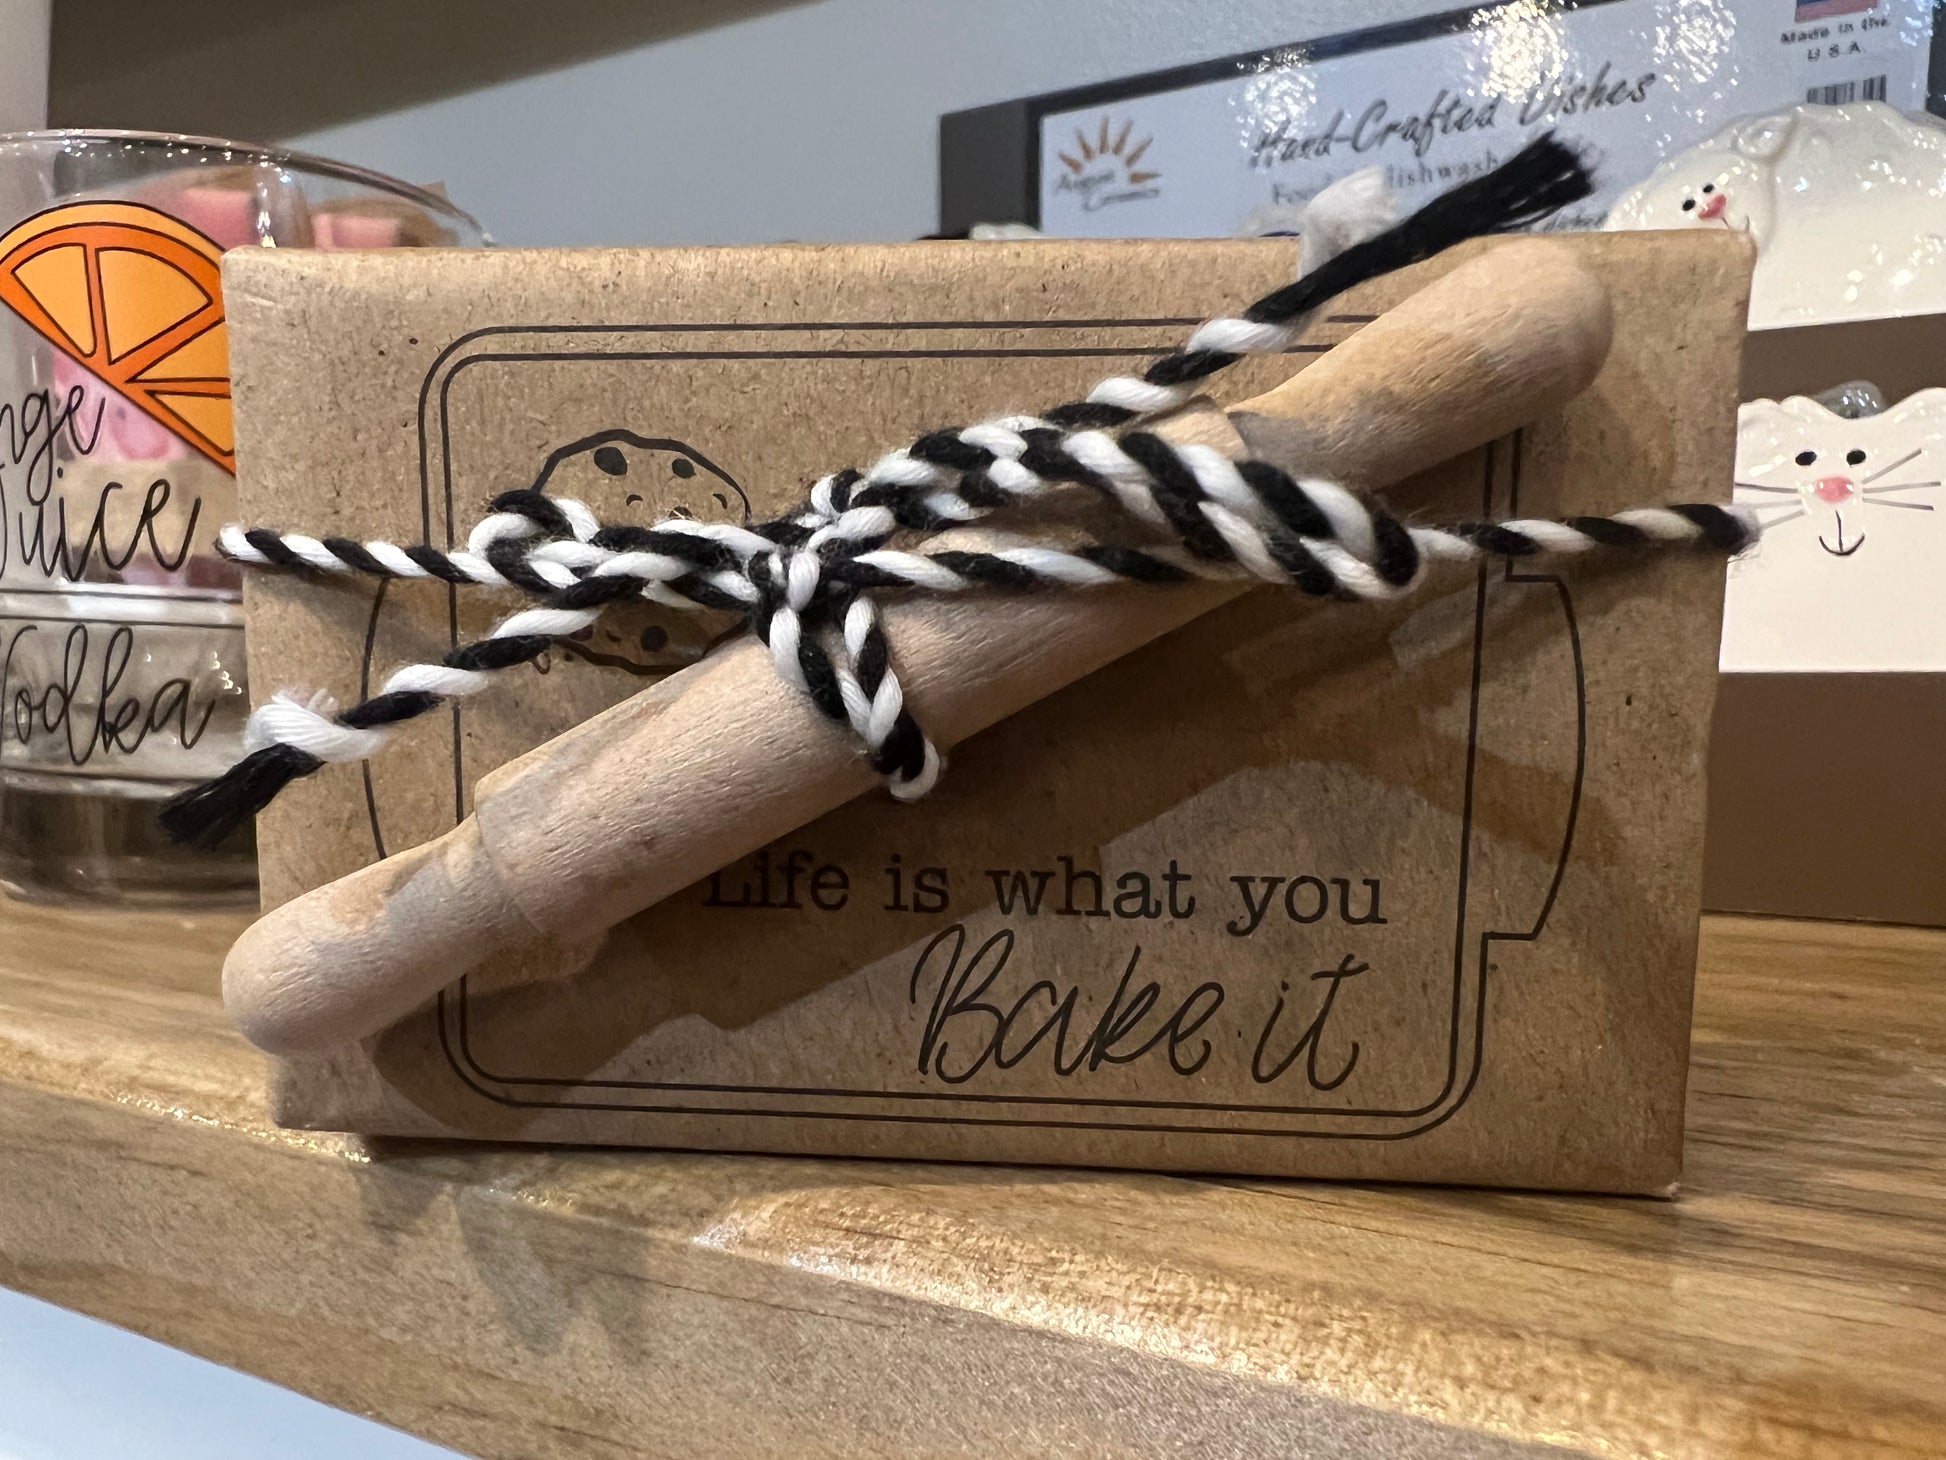 Vanilla Scented Soap Bar with "Life is what you bake it" and a rolling pin.